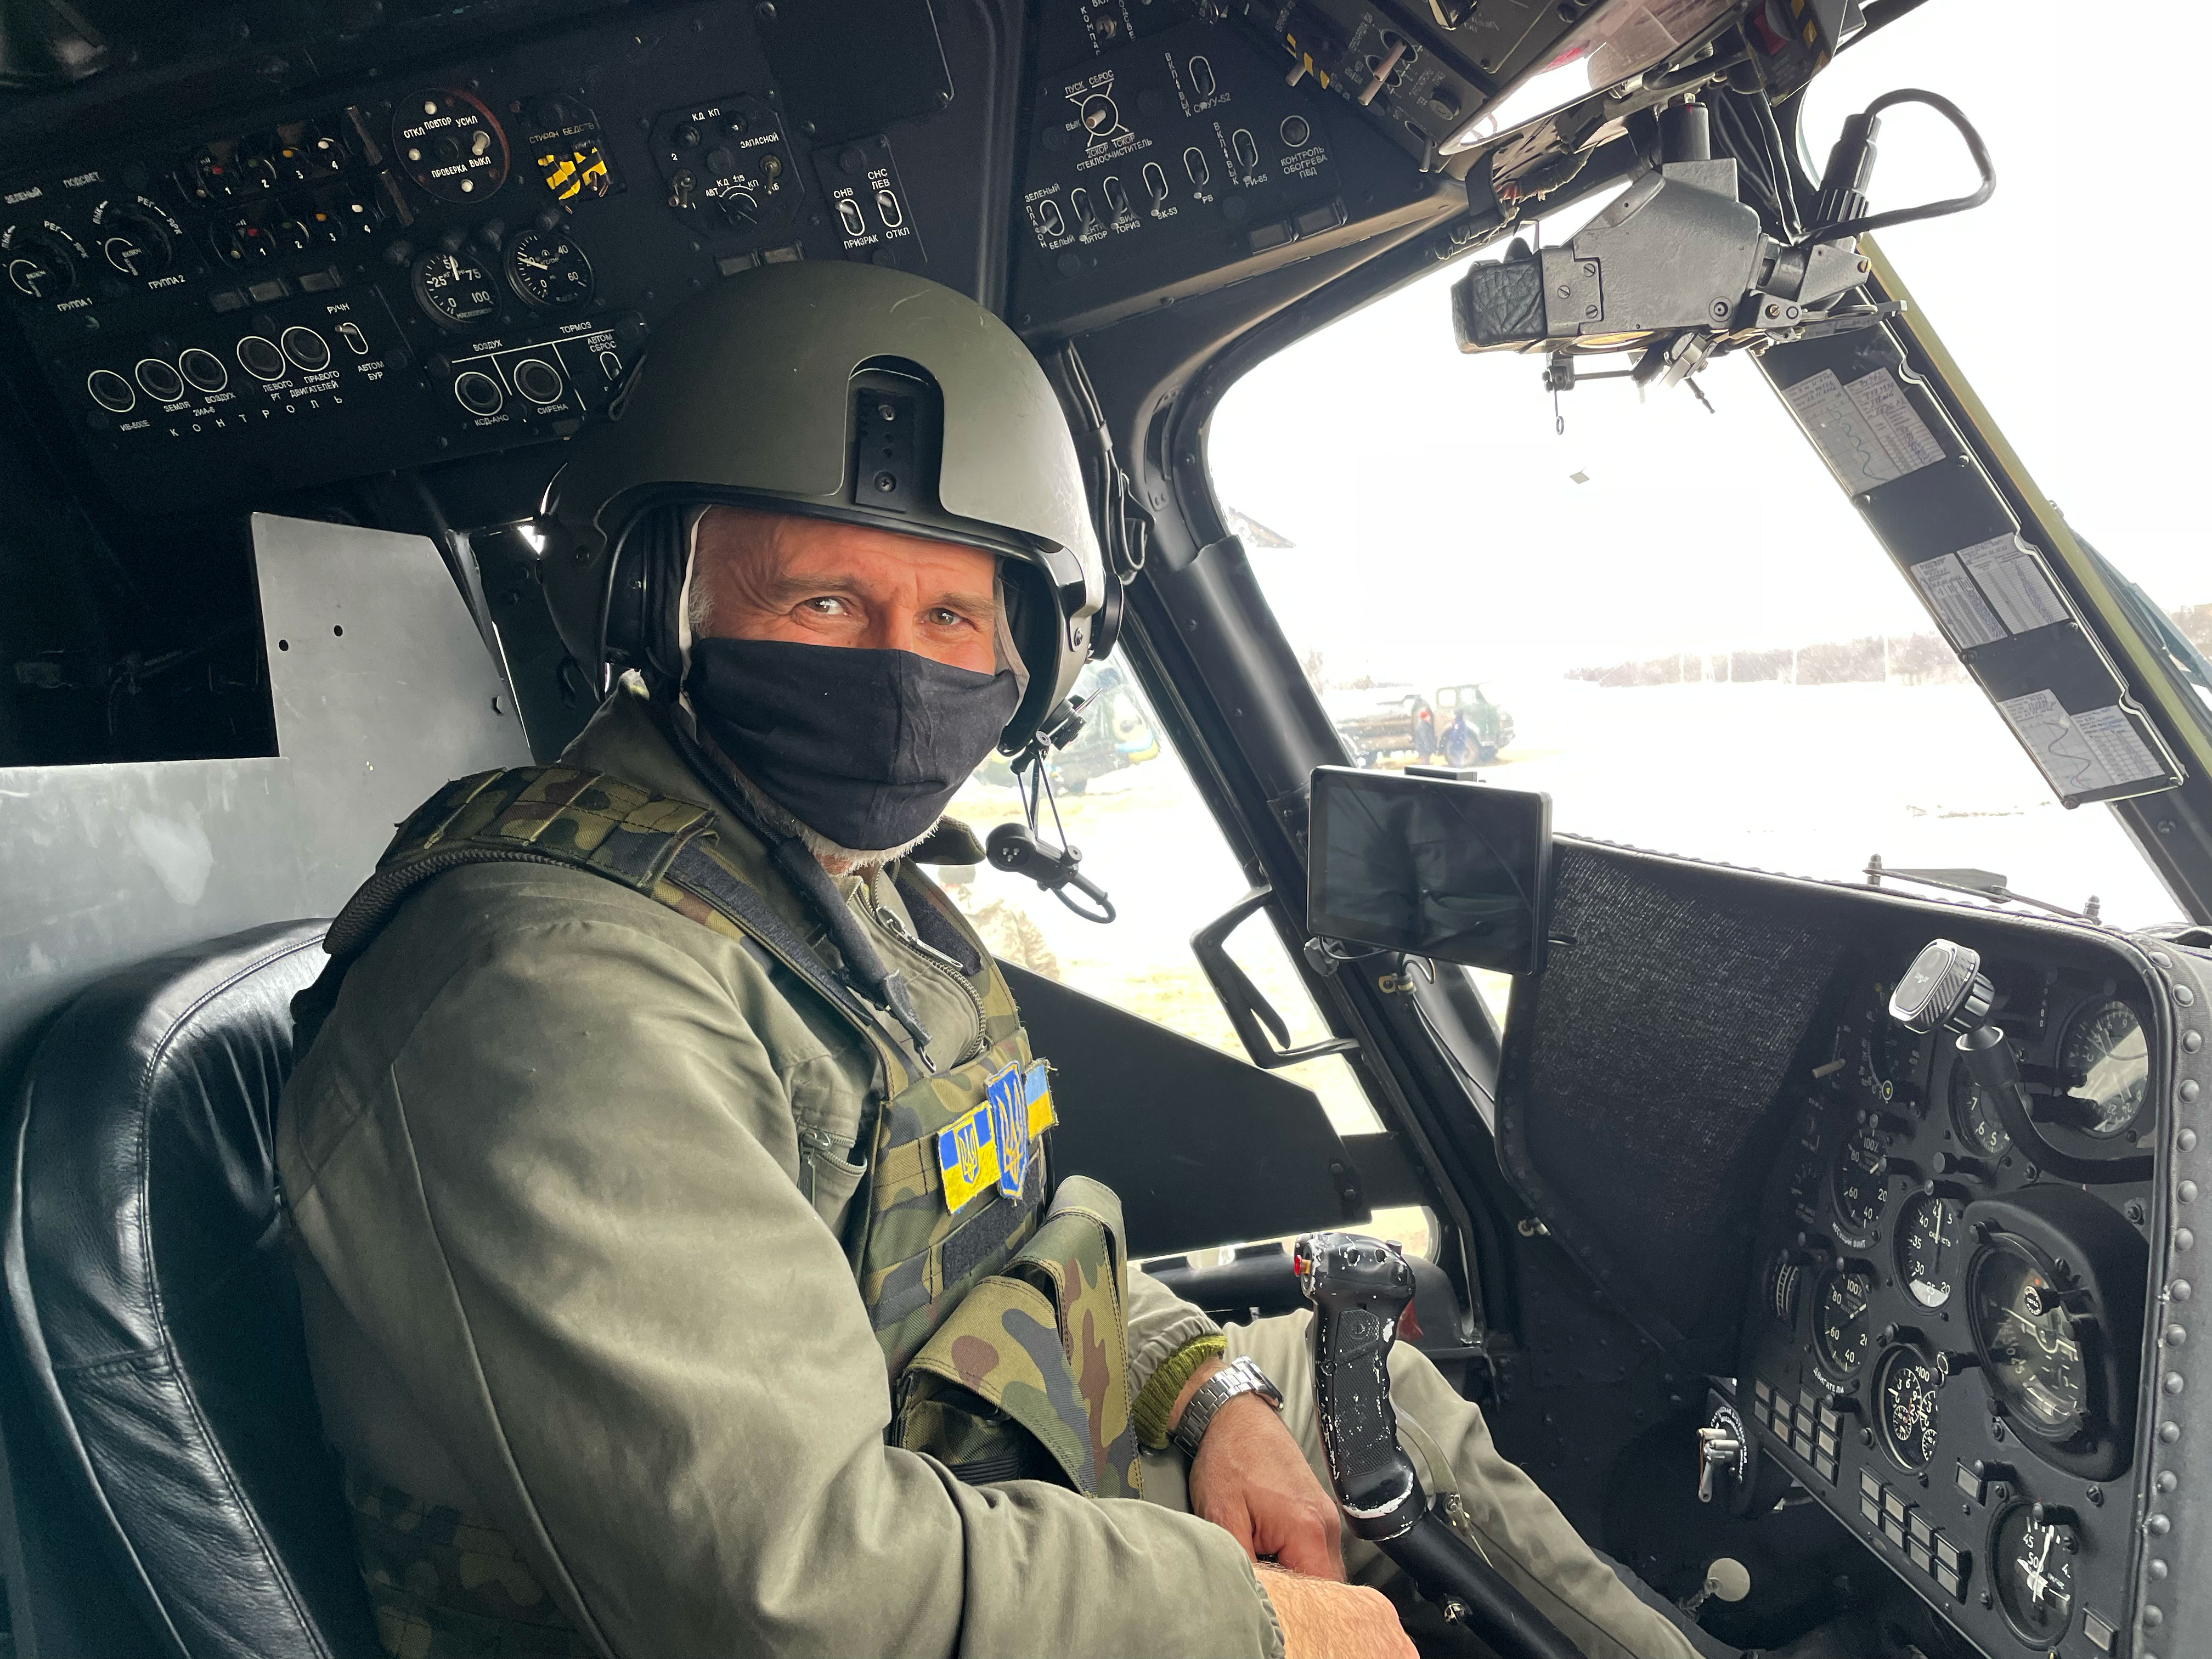 Ukrainian helicopter pilot Hennady got his education in Russia and served as a Russian officer for three years. He never imagined he would one day need to fight against them. 